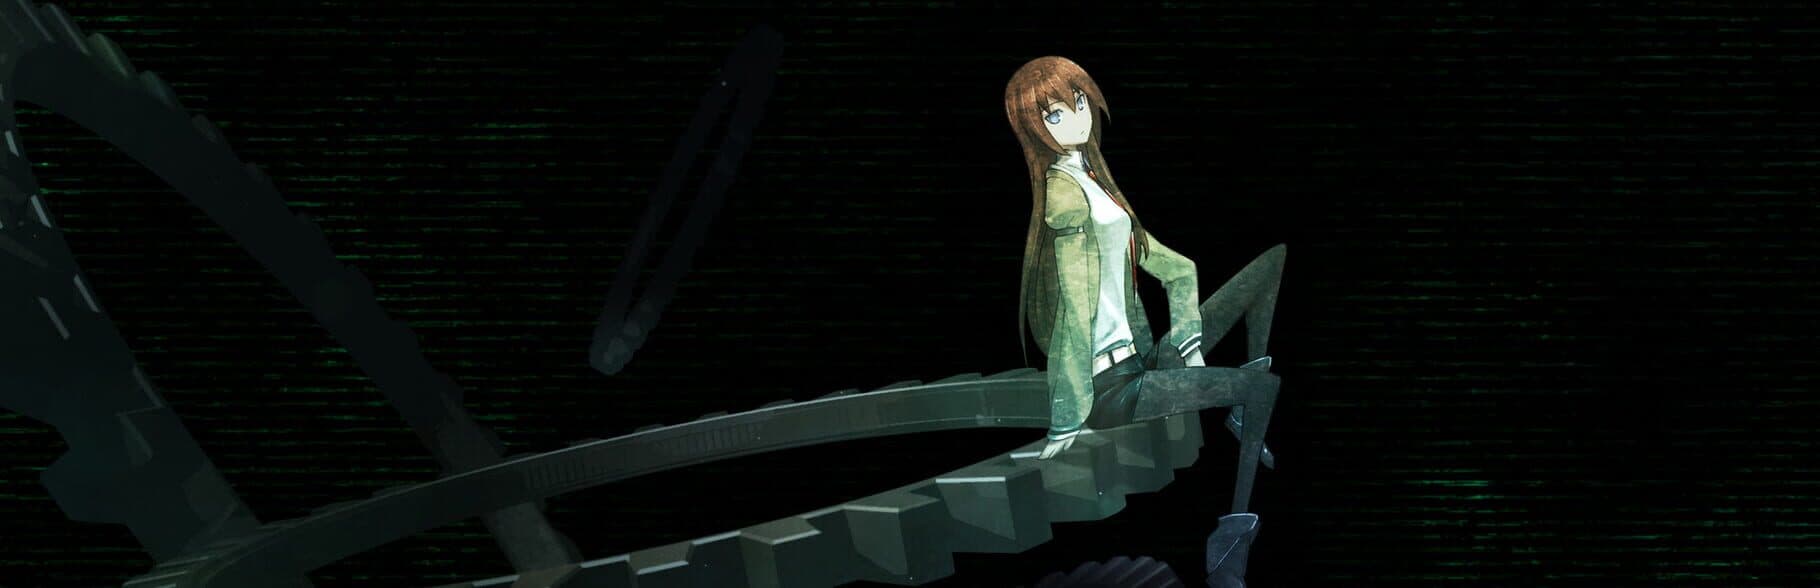 Steins;Gate: Linear Bounded Phenogram Image